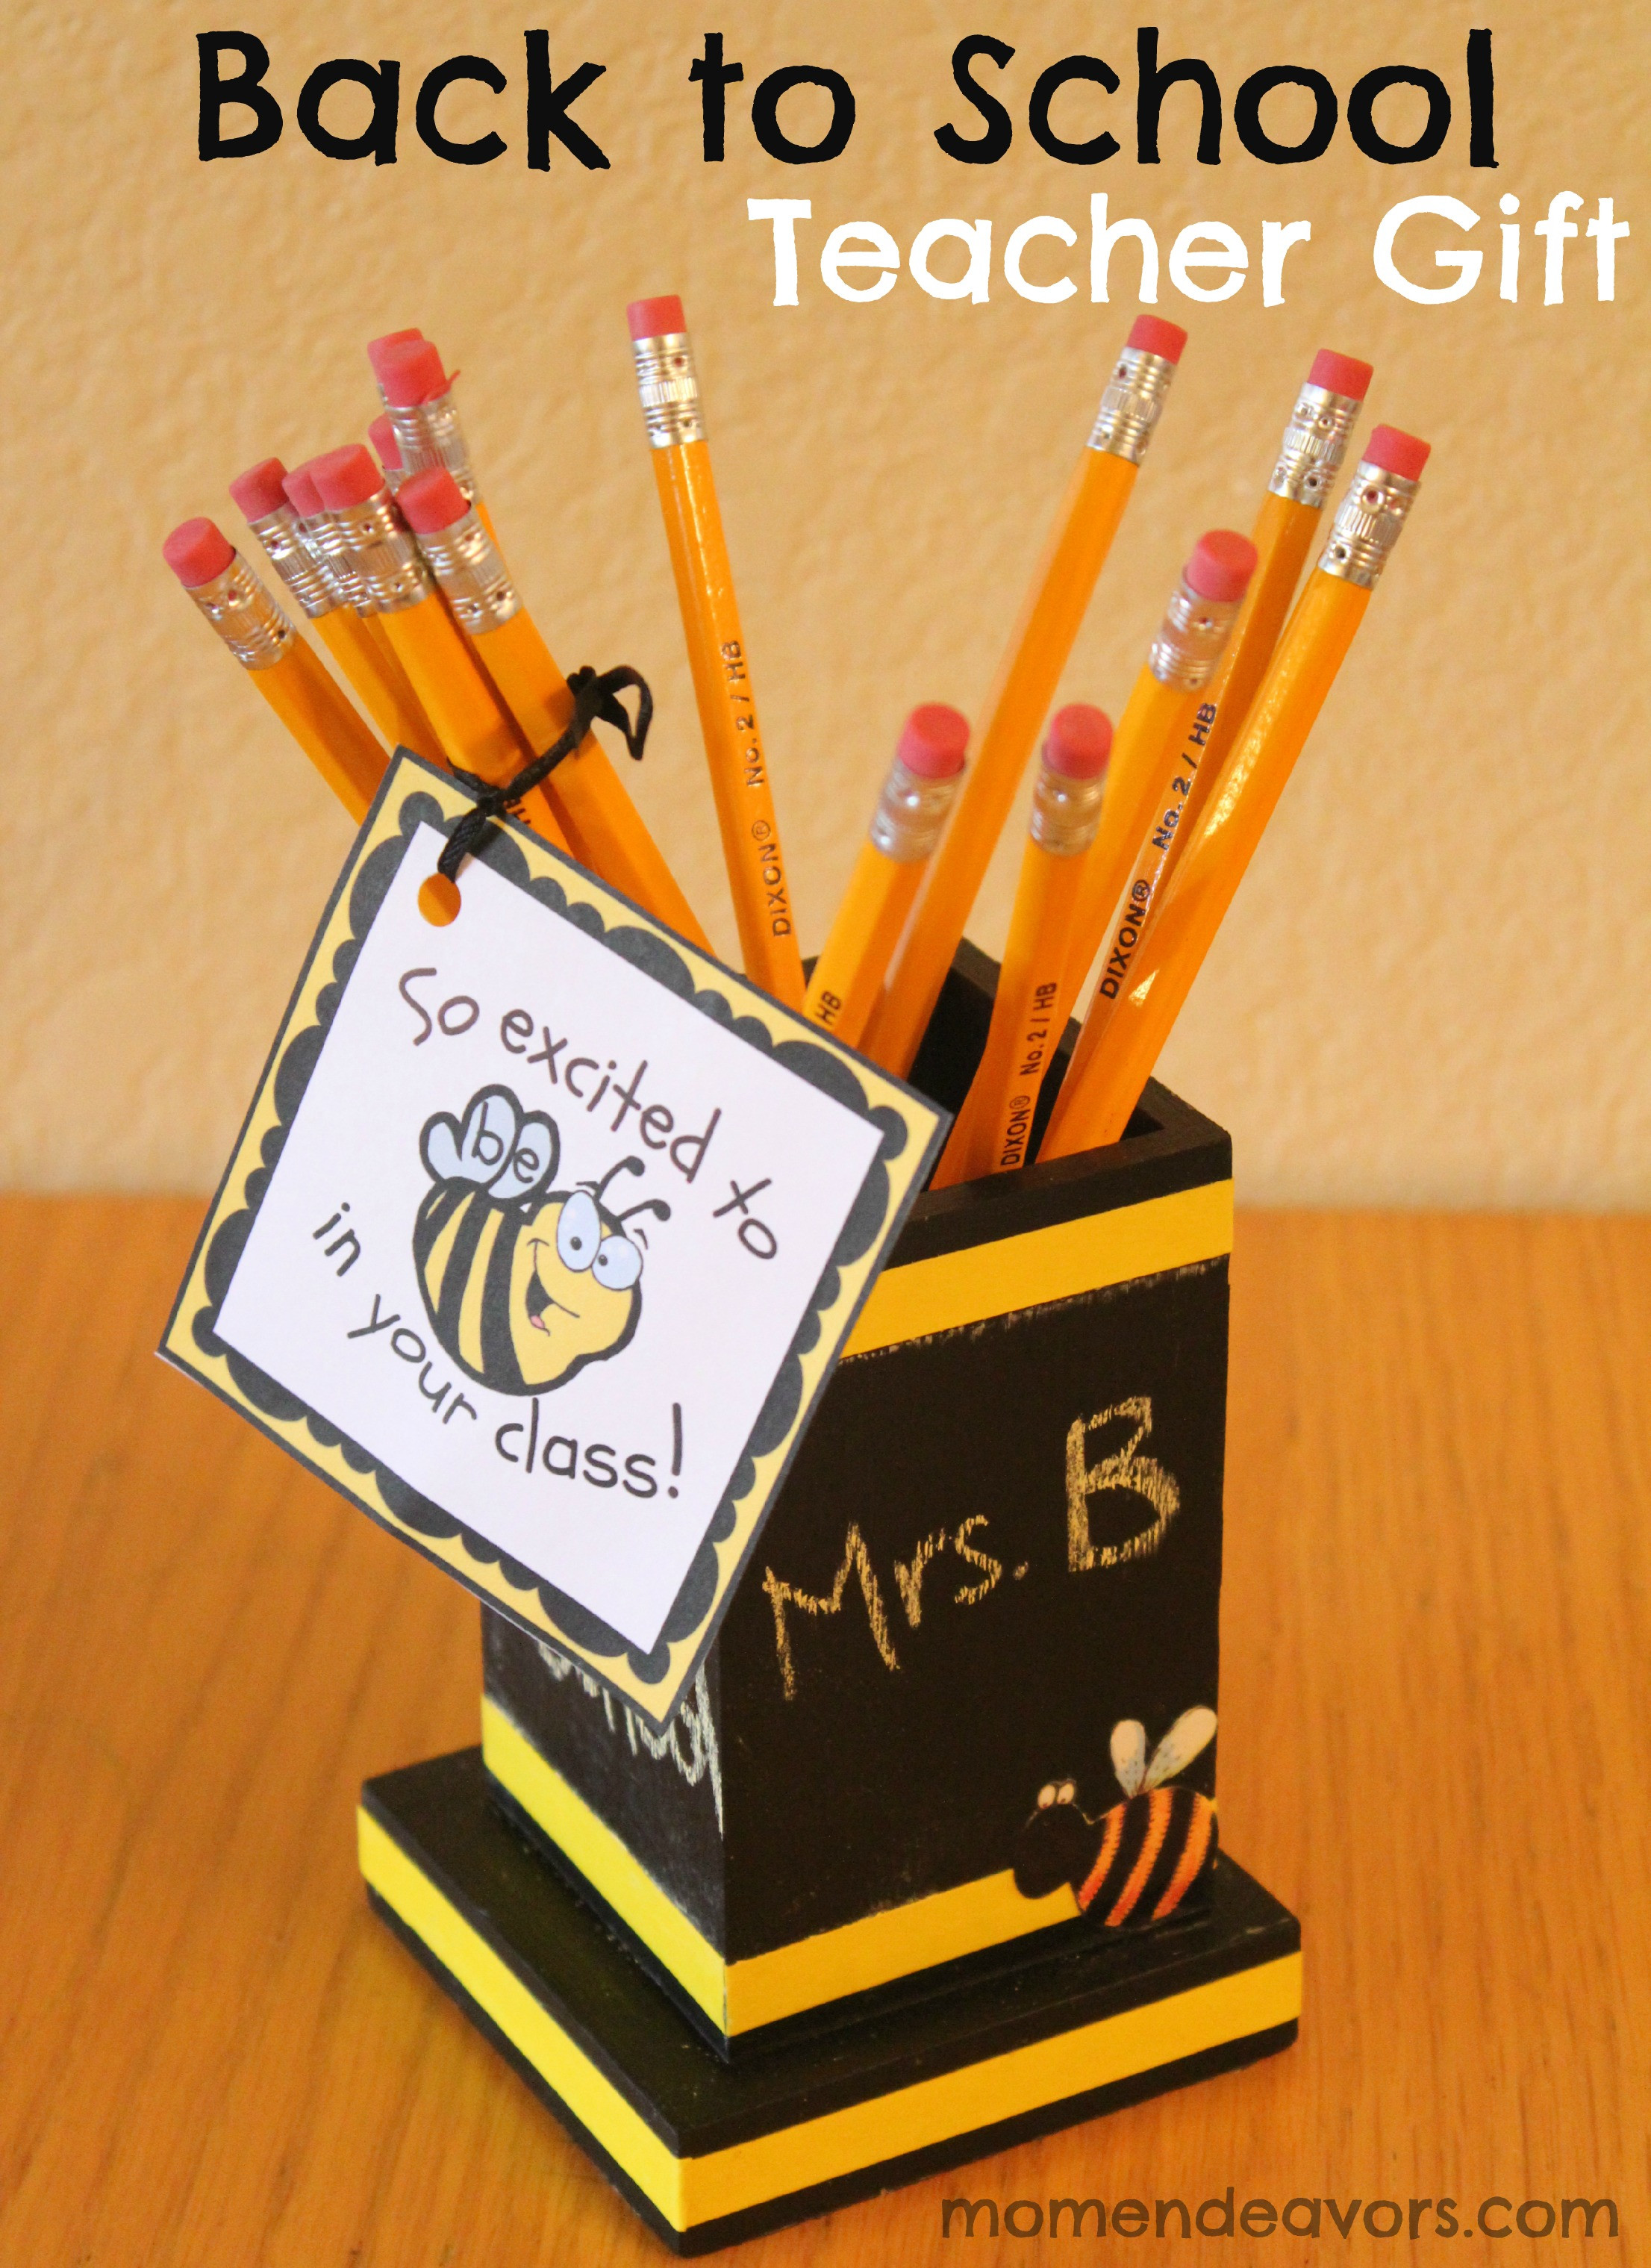 Back To School Gifts For Teachers
 Back to School Teacher Gift